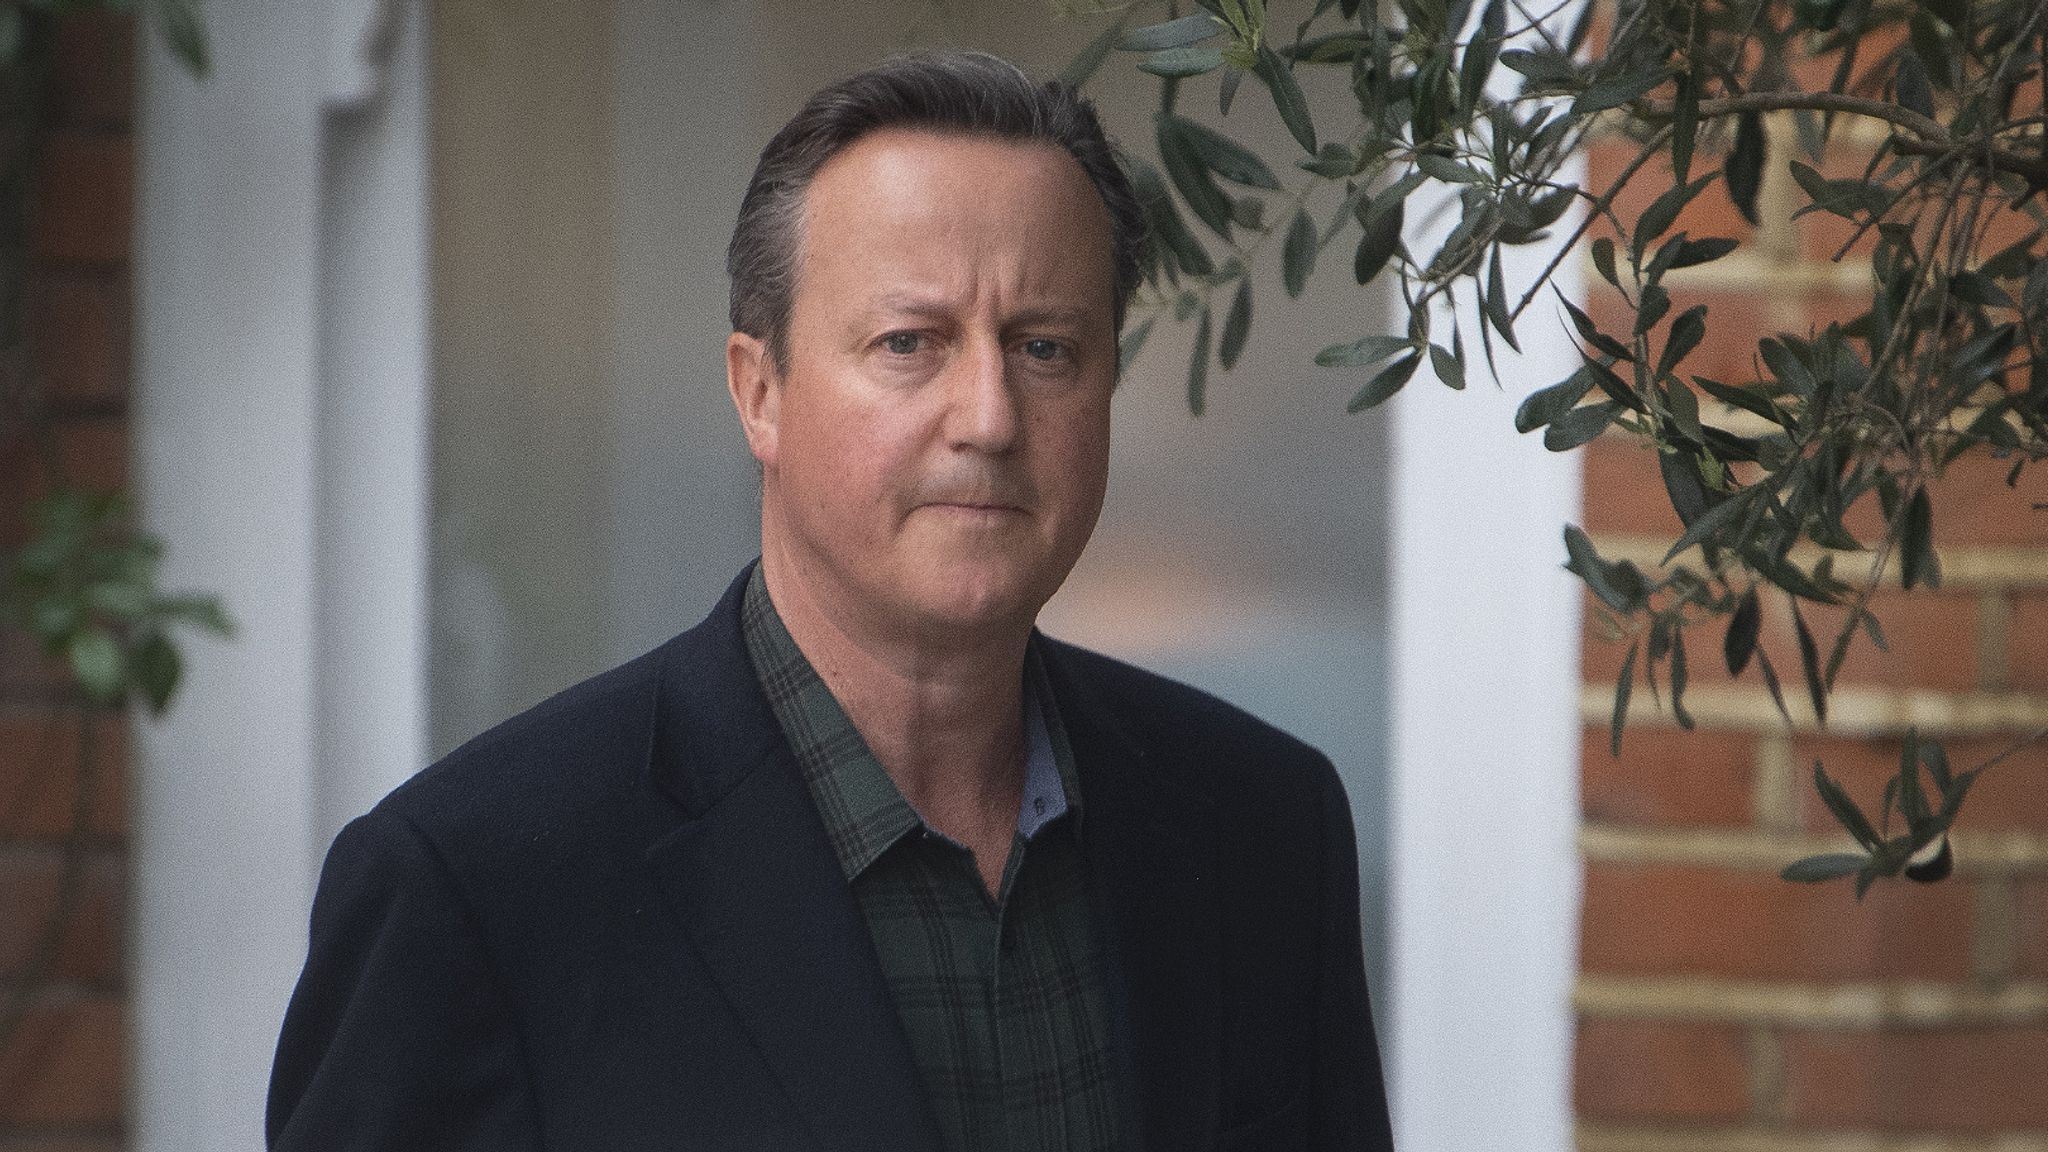 David Cameron Quits Afiniti Role After Former Employees Sex Claims Against Software Company 7480